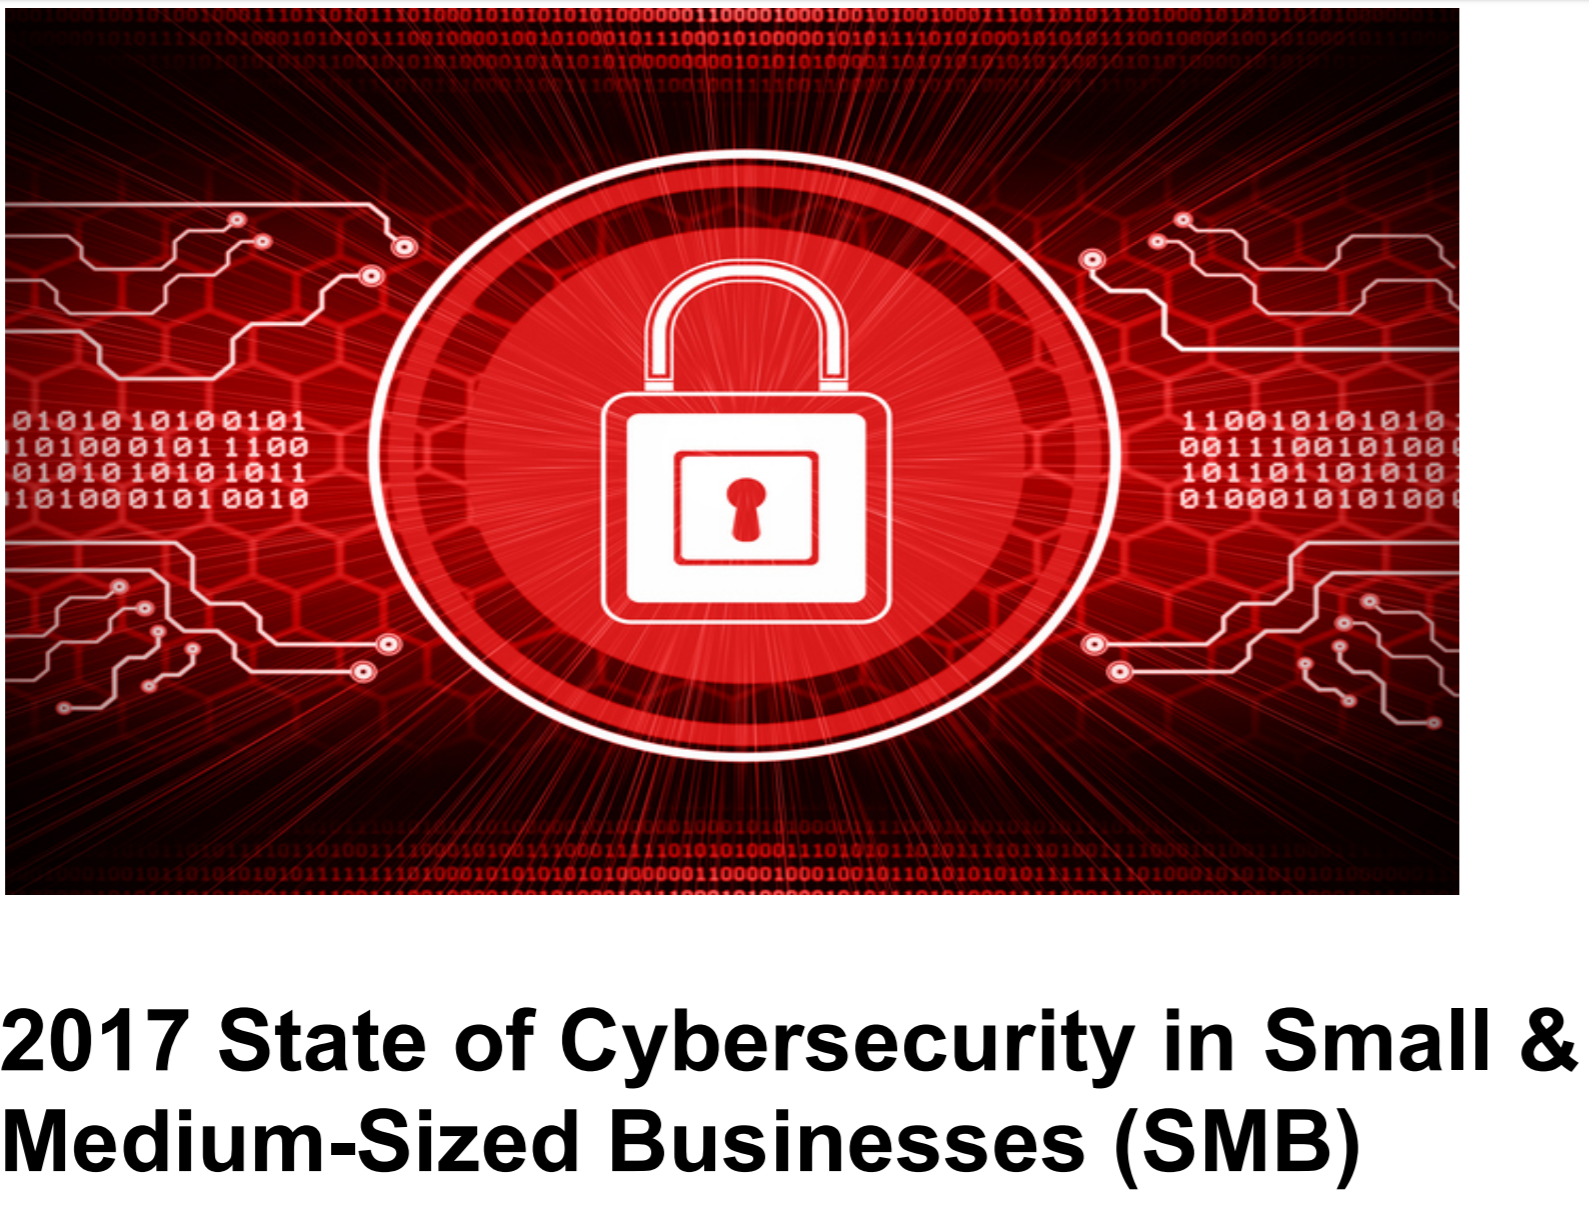 2017 State of Cybersecurity in Small & Medium-Sized Businesses (SMB / SME)